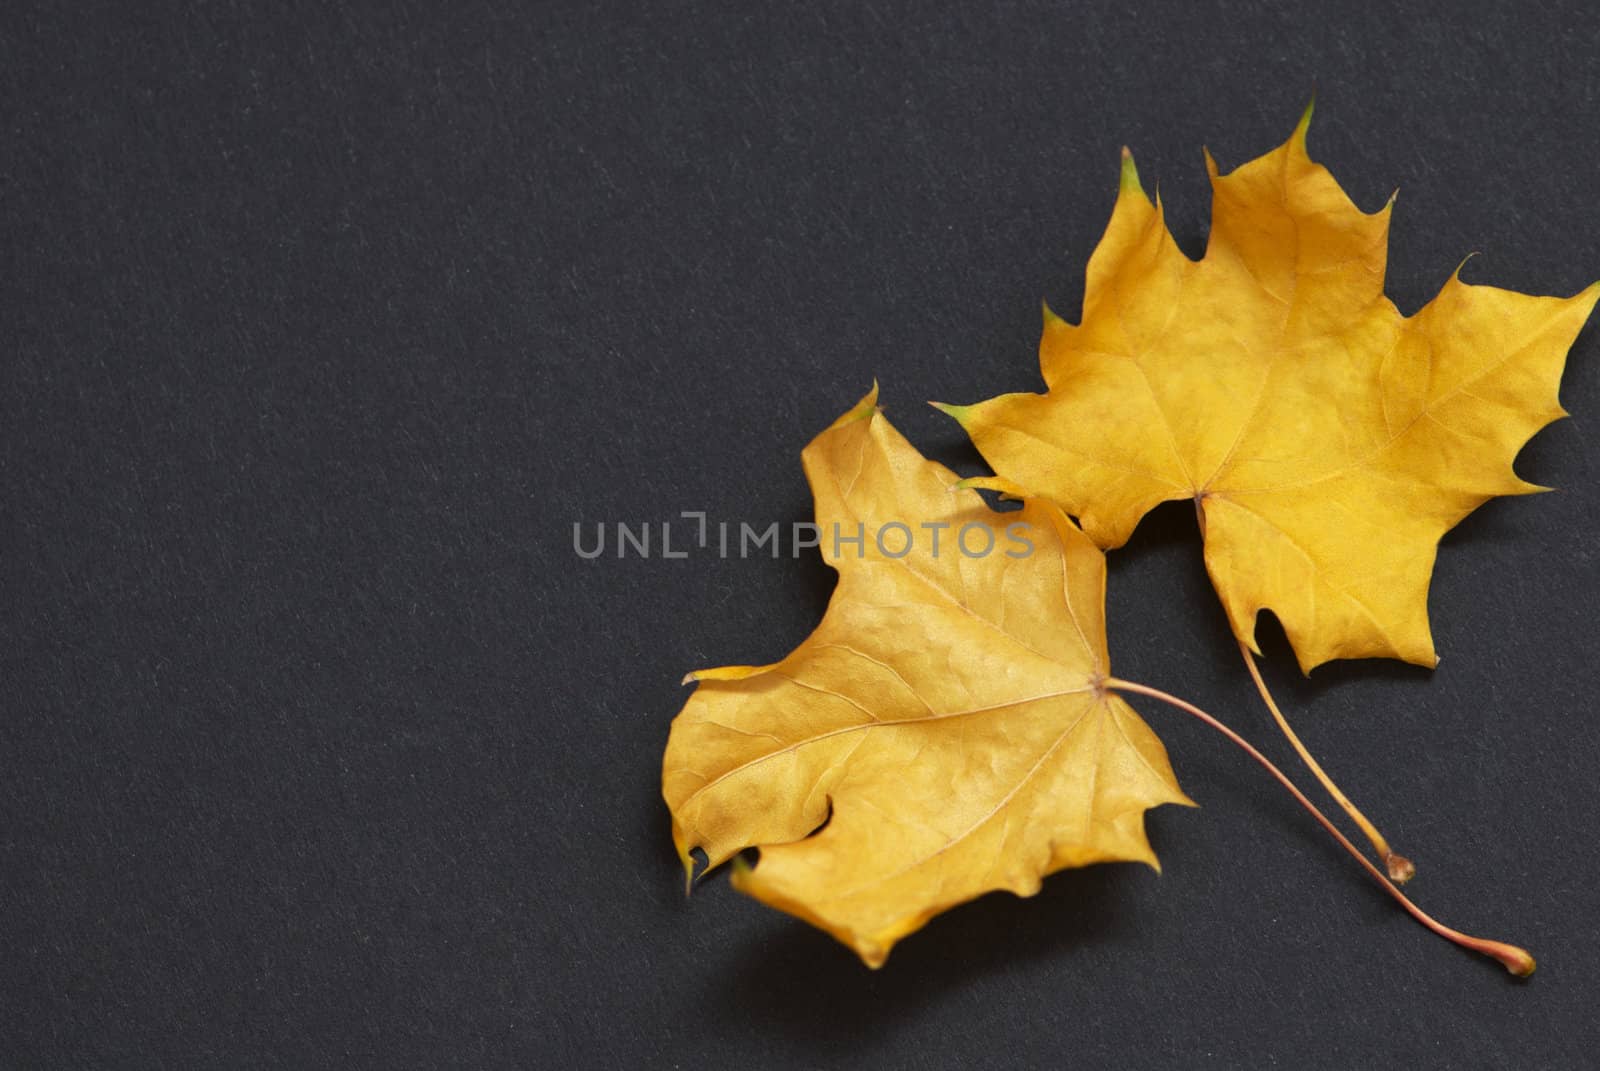 Two maple leaves on a black background by Olinkau